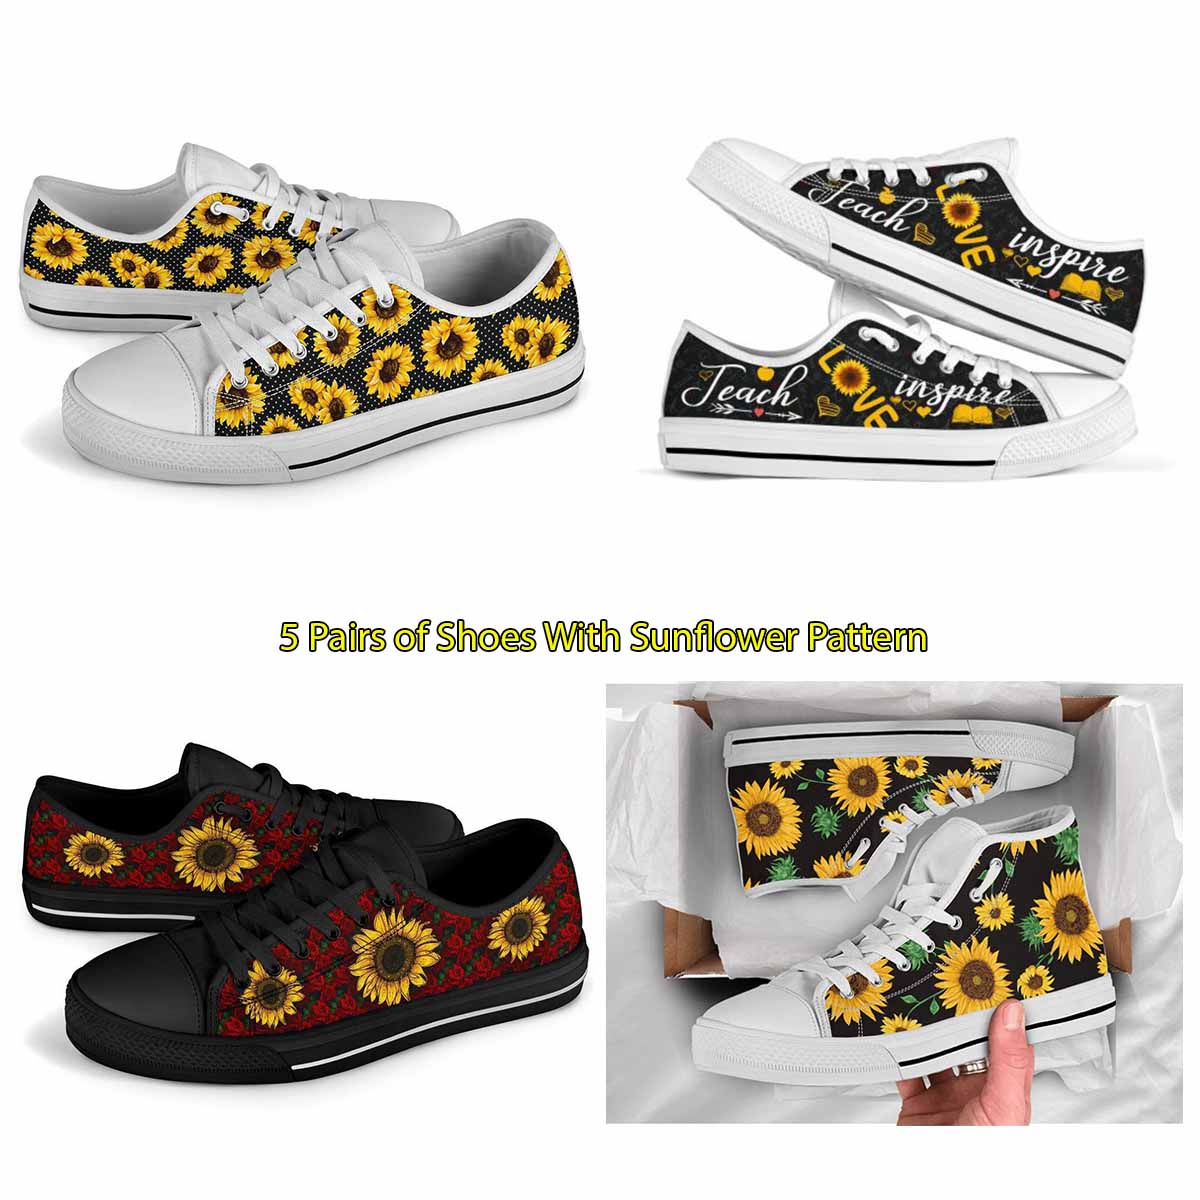 5 Pairs of Shoes With Sunflower Pattern